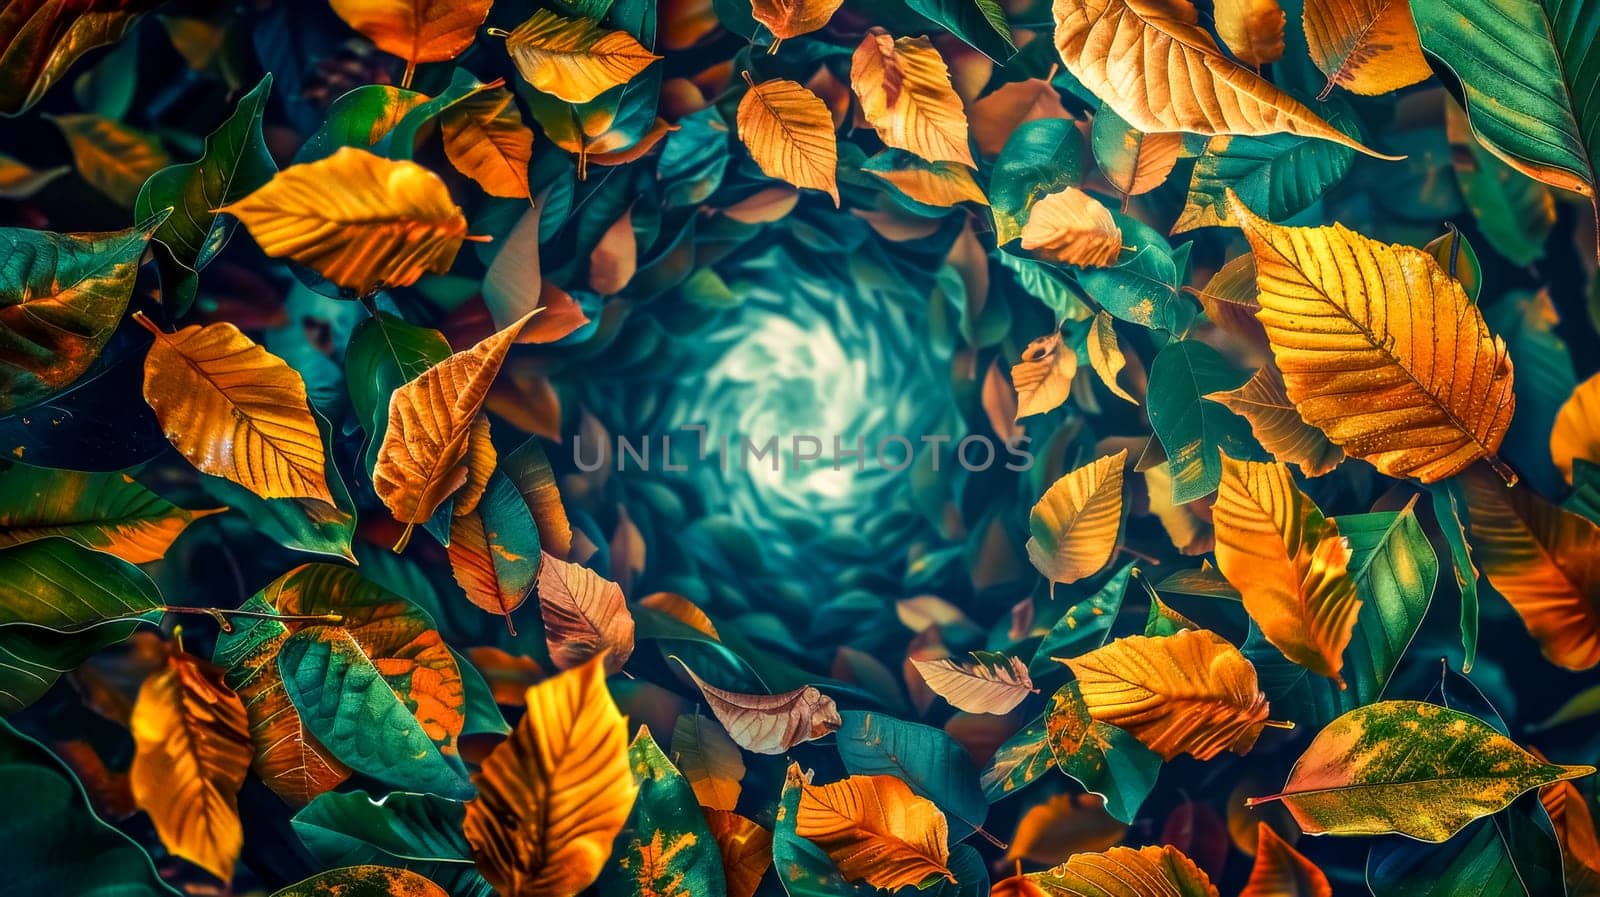 Creative top view of autumn leaves arranged in a swirl pattern on a nature backdrop